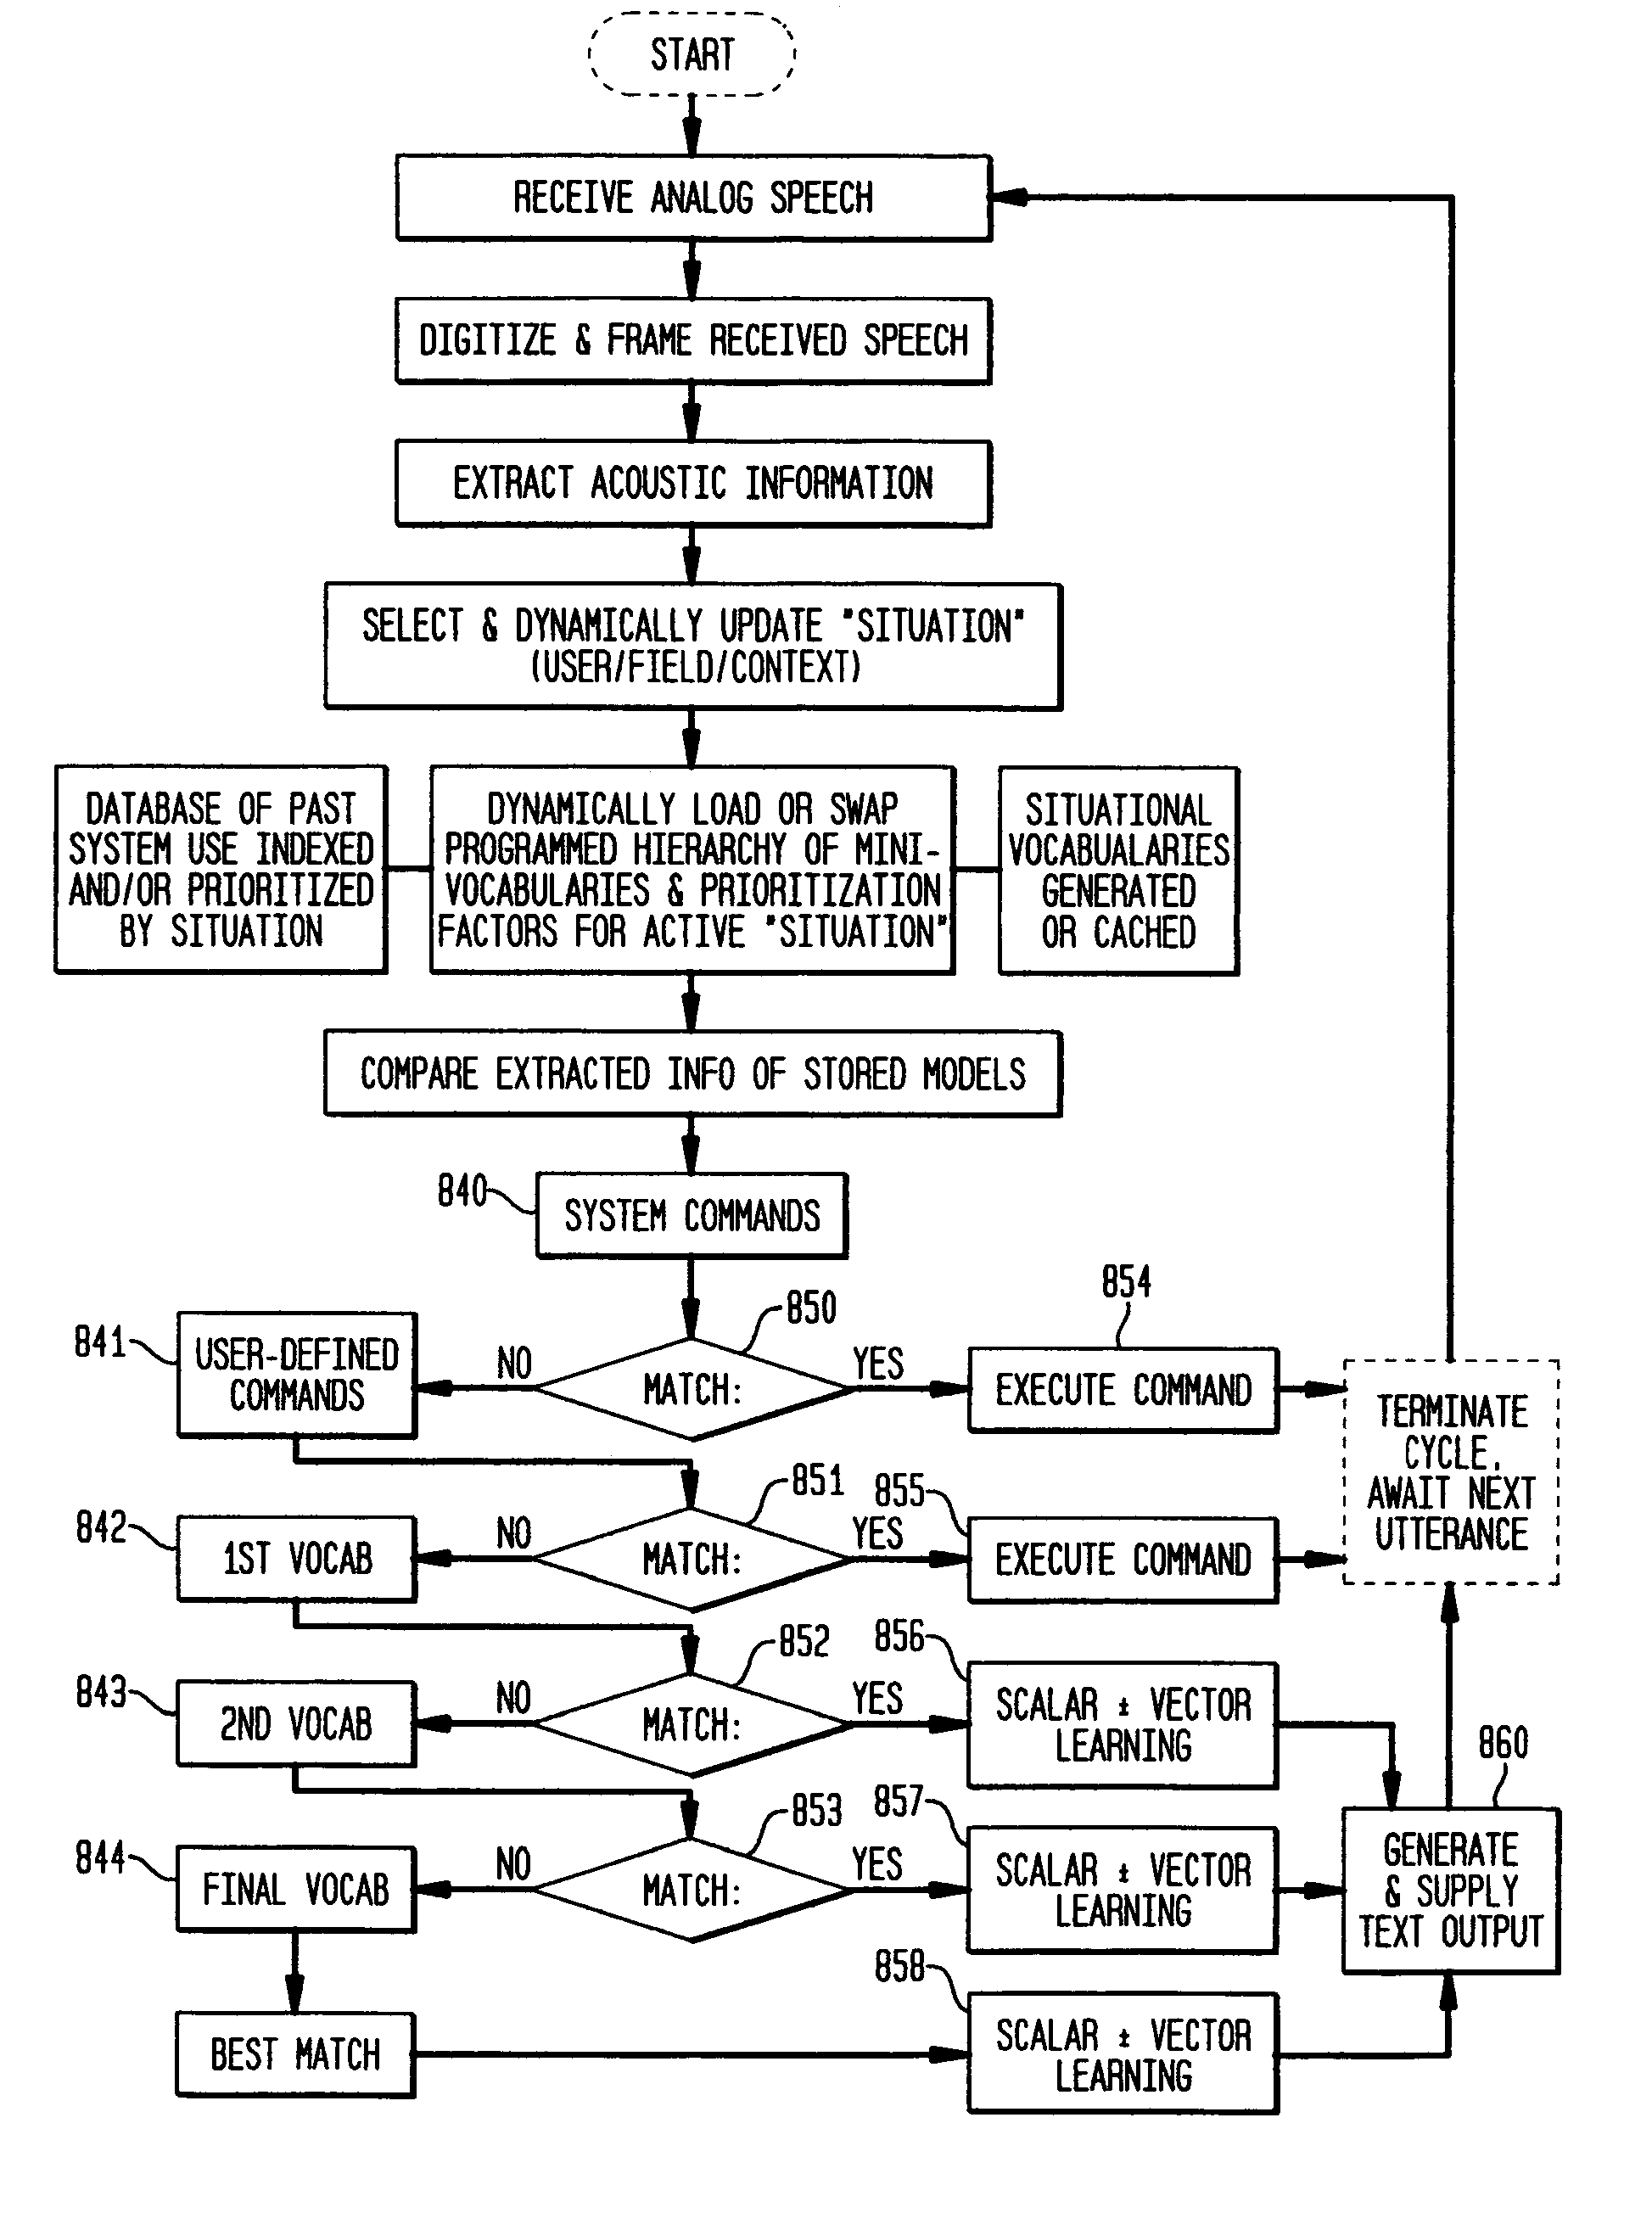 Method and apparatus for improving the transcription accuracy of speech recognition software